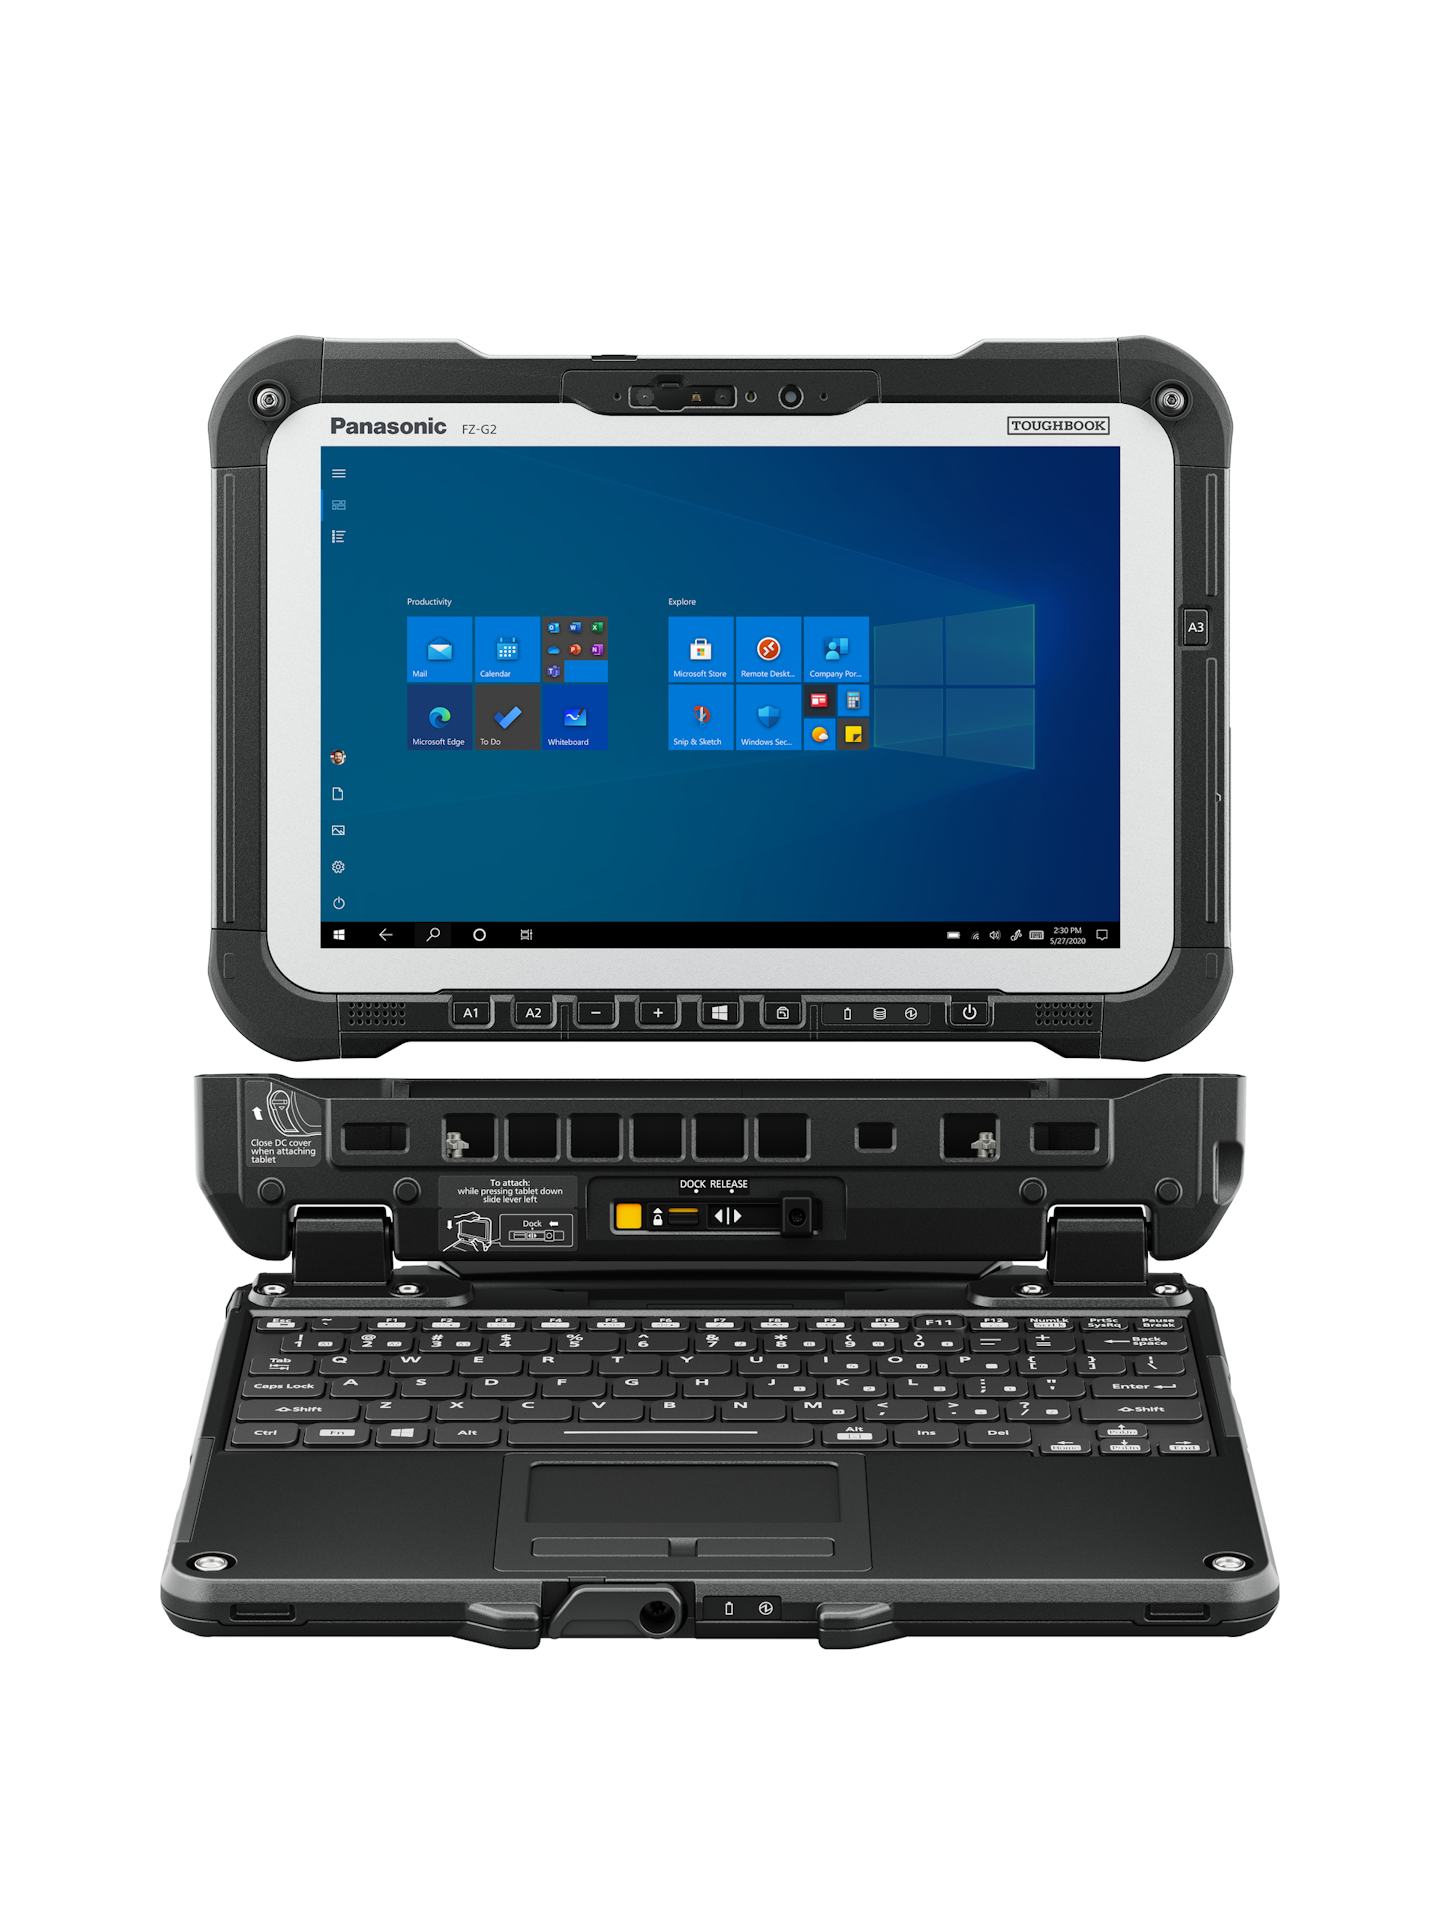 The Panasonic Toughbook G2 can be operated solely in tablet form or be paired with a keyboard.